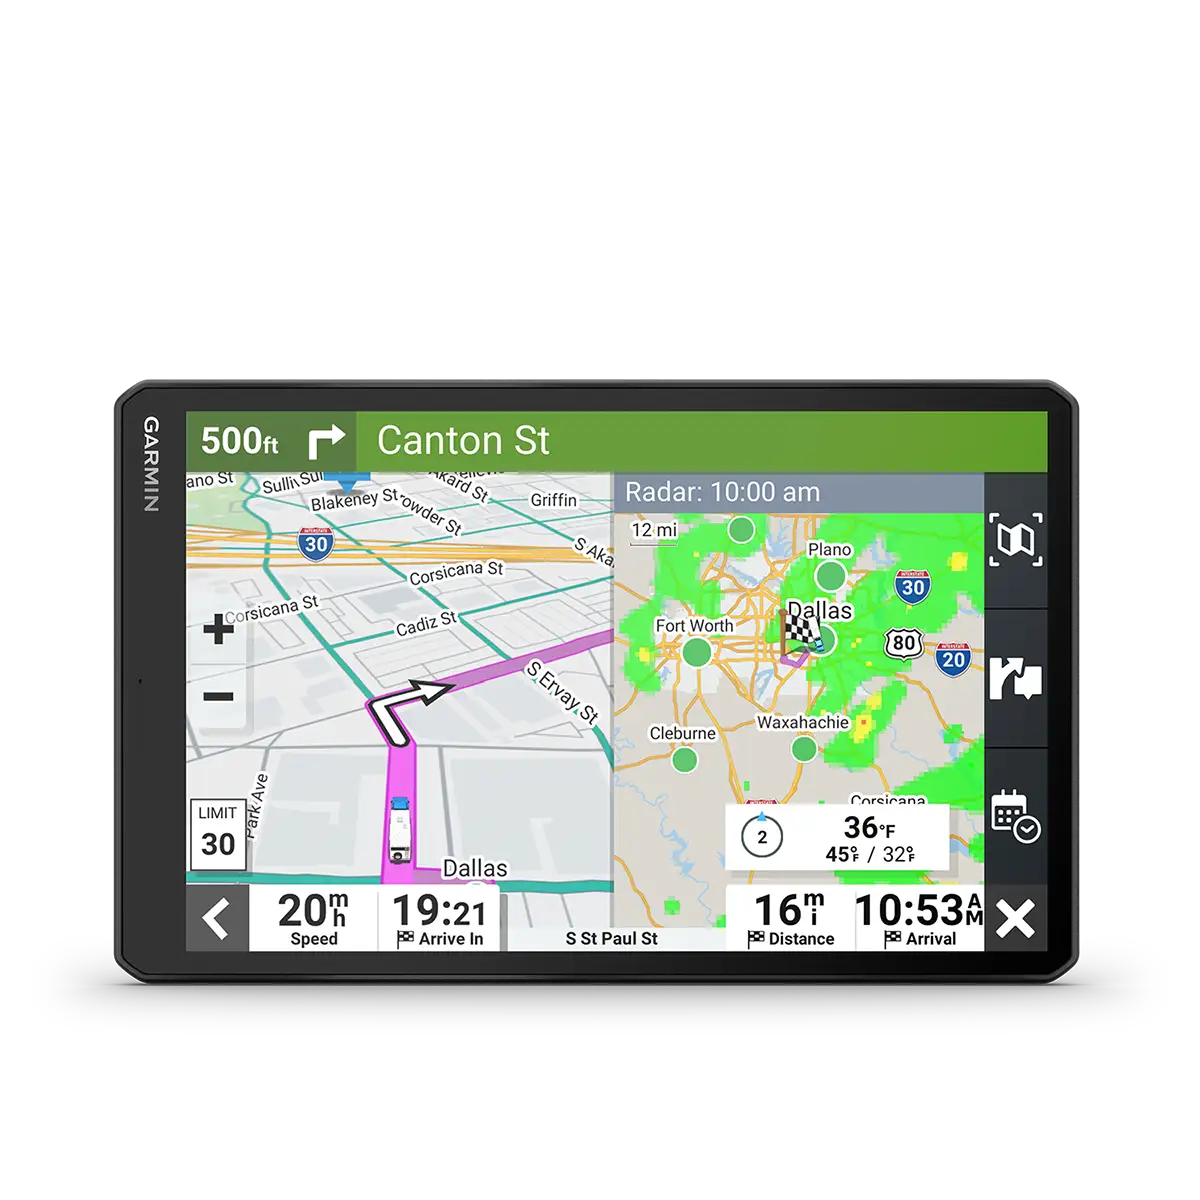 Garmin RV 1095 directions and other information on screen